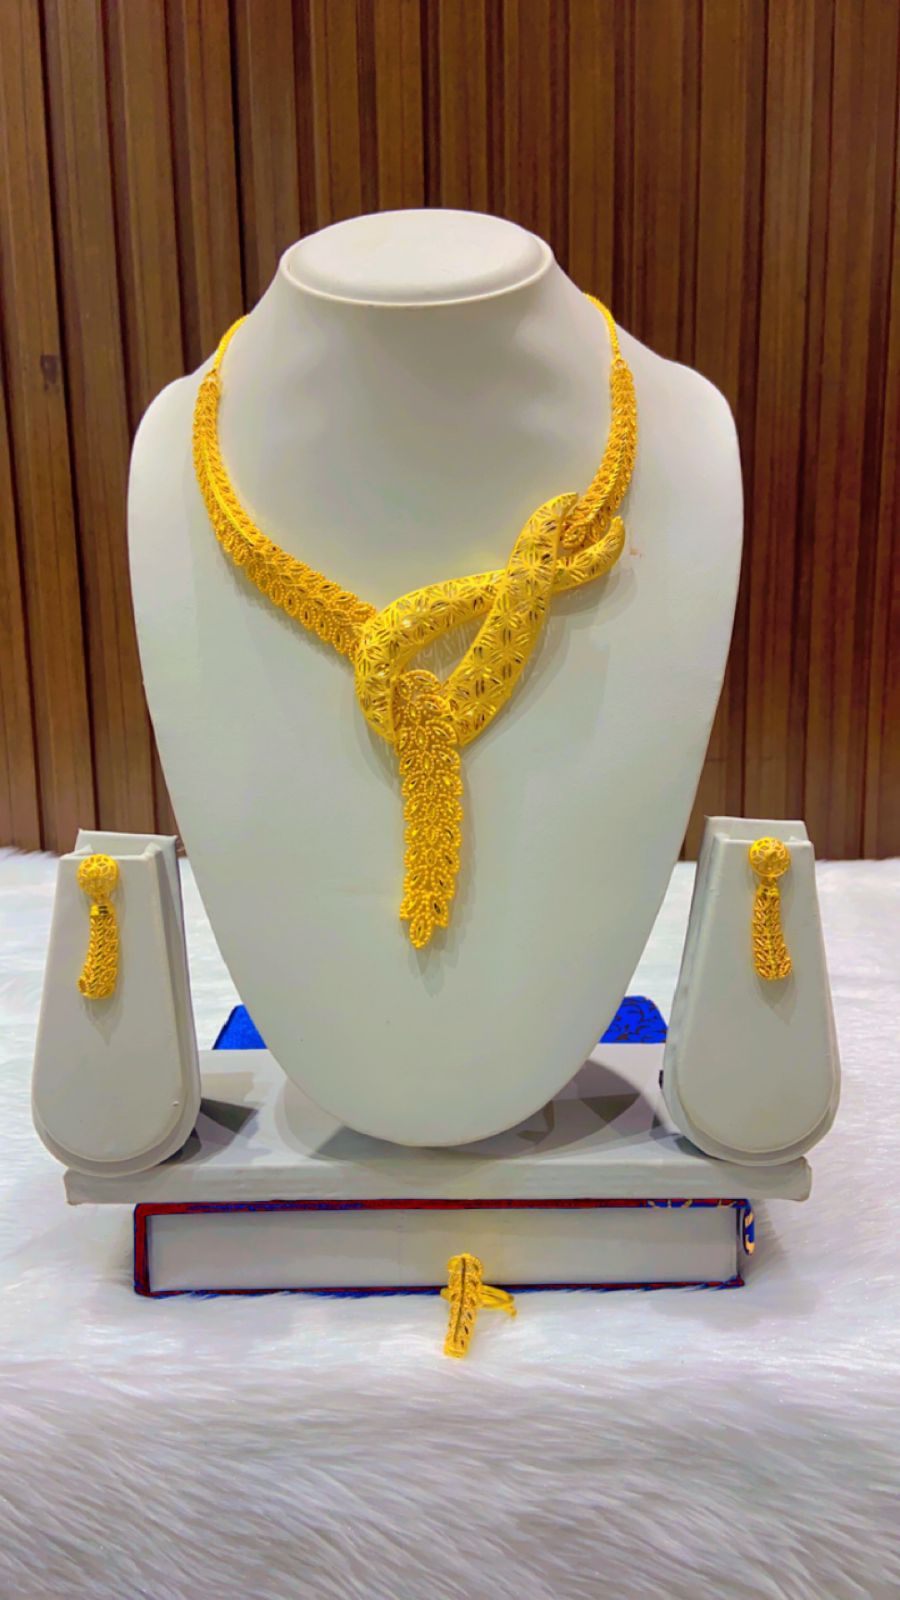 Necklace 196 – Choudhary Gold